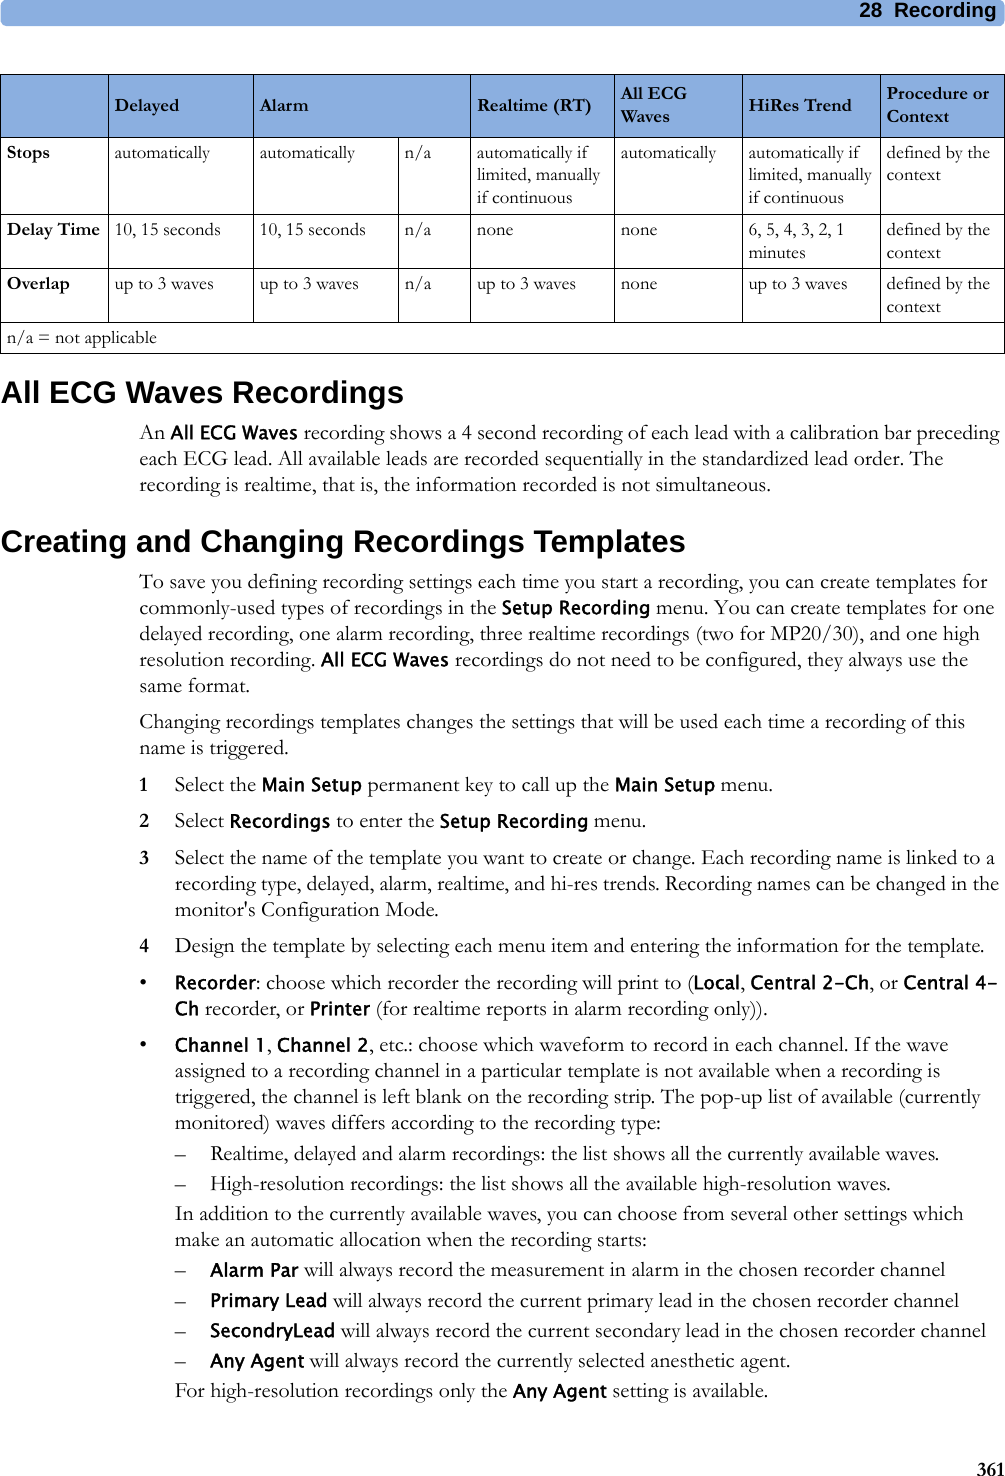 28 Recording361All ECG Waves RecordingsAn All ECG Waves recording shows a 4 second recording of each lead with a calibration bar preceding each ECG lead. All available leads are recorded sequentially in the standardized lead order. The recording is realtime, that is, the information recorded is not simultaneous.Creating and Changing Recordings TemplatesTo save you defining recording settings each time you start a recording, you can create templates for commonly-used types of recordings in the Setup Recording menu. You can create templates for one delayed recording, one alarm recording, three realtime recordings (two for MP20/30), and one high resolution recording. All ECG Waves recordings do not need to be configured, they always use the same format.Changing recordings templates changes the settings that will be used each time a recording of this name is triggered.1Select the Main Setup permanent key to call up the Main Setup menu.2Select Recordings to enter the Setup Recording menu.3Select the name of the template you want to create or change. Each recording name is linked to a recording type, delayed, alarm, realtime, and hi-res trends. Recording names can be changed in the monitor&apos;s Configuration Mode.4Design the template by selecting each menu item and entering the information for the template.•Recorder: choose which recorder the recording will print to (Local, Central 2-Ch, or Central 4-Ch recorder, or Printer (for realtime reports in alarm recording only)).•Channel 1, Channel 2, etc.: choose which waveform to record in each channel. If the wave assigned to a recording channel in a particular template is not available when a recording is triggered, the channel is left blank on the recording strip. The pop-up list of available (currently monitored) waves differs according to the recording type:– Realtime, delayed and alarm recordings: the list shows all the currently available waves.– High-resolution recordings: the list shows all the available high-resolution waves.In addition to the currently available waves, you can choose from several other settings which make an automatic allocation when the recording starts:–Alarm Par will always record the measurement in alarm in the chosen recorder channel–Primary Lead will always record the current primary lead in the chosen recorder channel–SecondryLead will always record the current secondary lead in the chosen recorder channel–Any Agent will always record the currently selected anesthetic agent.For high-resolution recordings only the Any Agent setting is available.Stops automatically automatically n/a automatically if limited, manually if continuousautomatically automatically if limited, manually if continuousdefined by the contextDelay Time 10, 15 seconds 10, 15 seconds n/a none none 6, 5, 4, 3, 2, 1 minutesdefined by the contextOverlap up to 3 waves up to 3 waves n/a up to 3 waves none up to 3 waves defined by the contextn/a = not applicableDelayed Alarm Realtime (RT) All ECG Waves HiRes Trend Procedure or Context